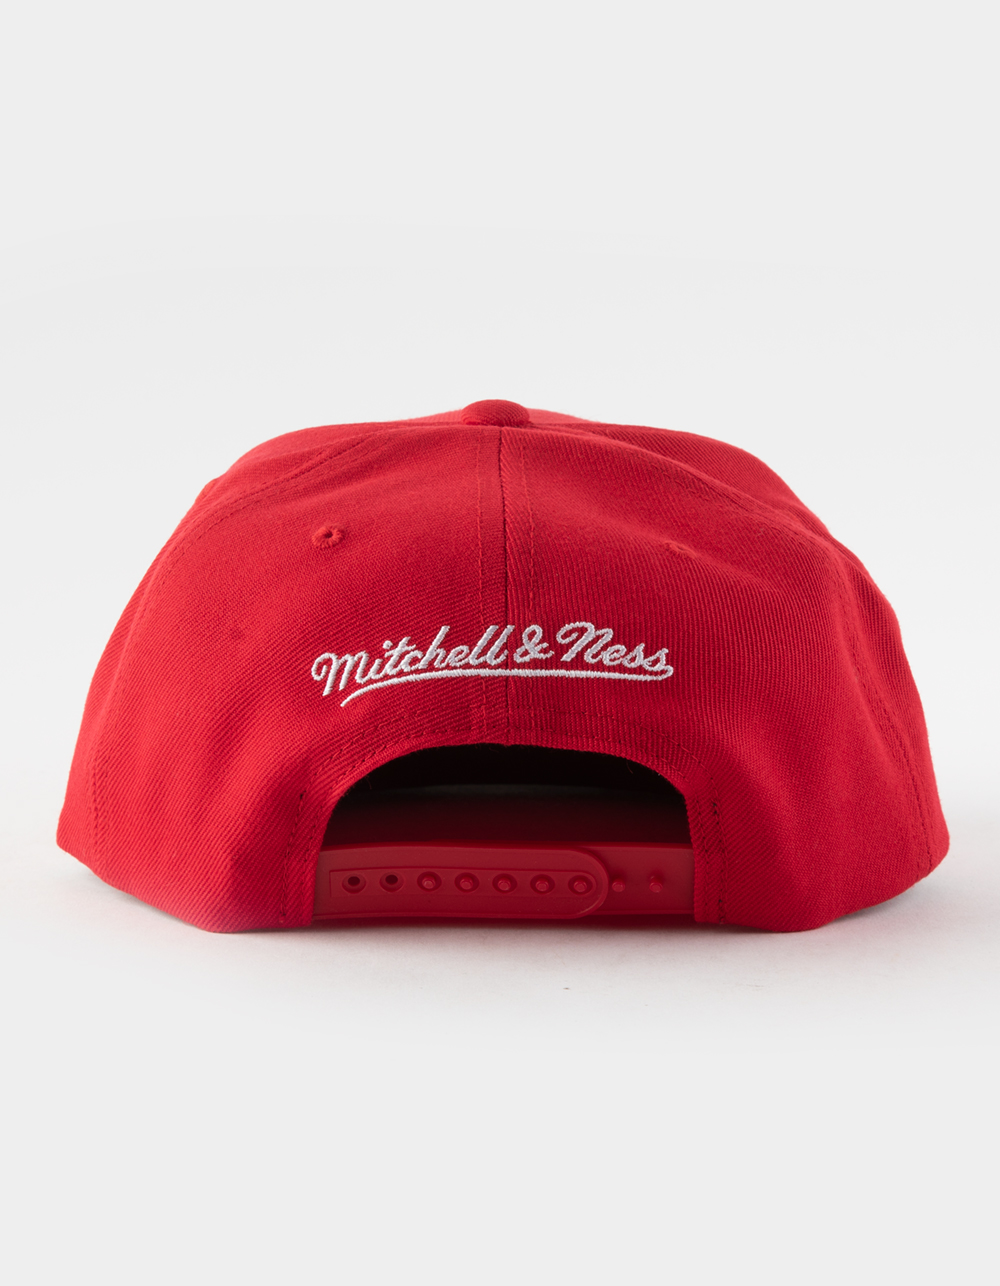 Mitchell & Ness, Accessories, La Clippers Snapback One Size Fits All